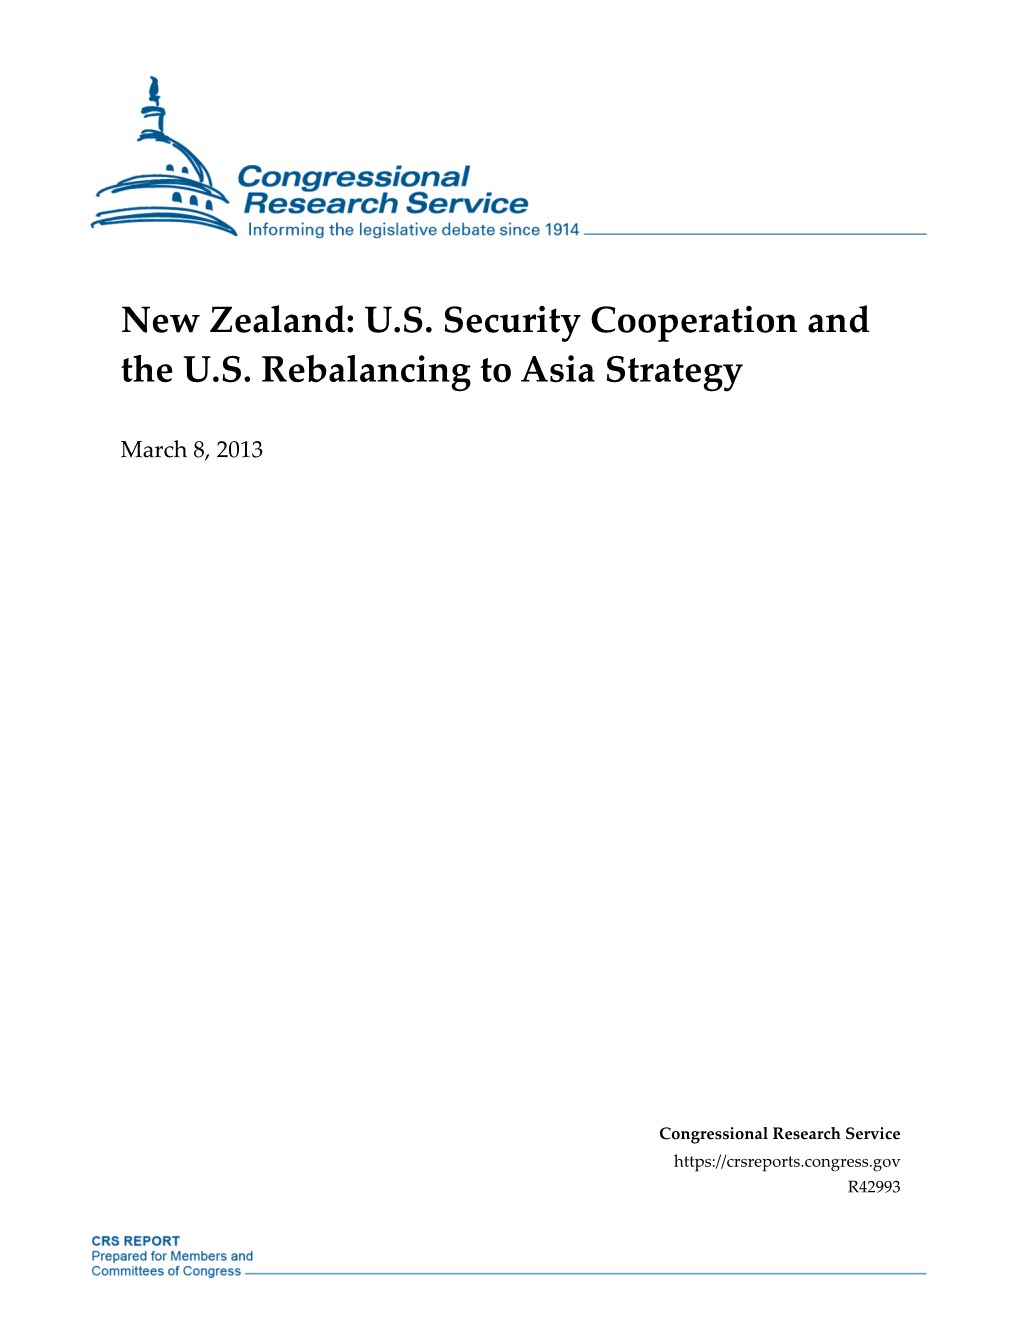 US Security Cooperation and the US